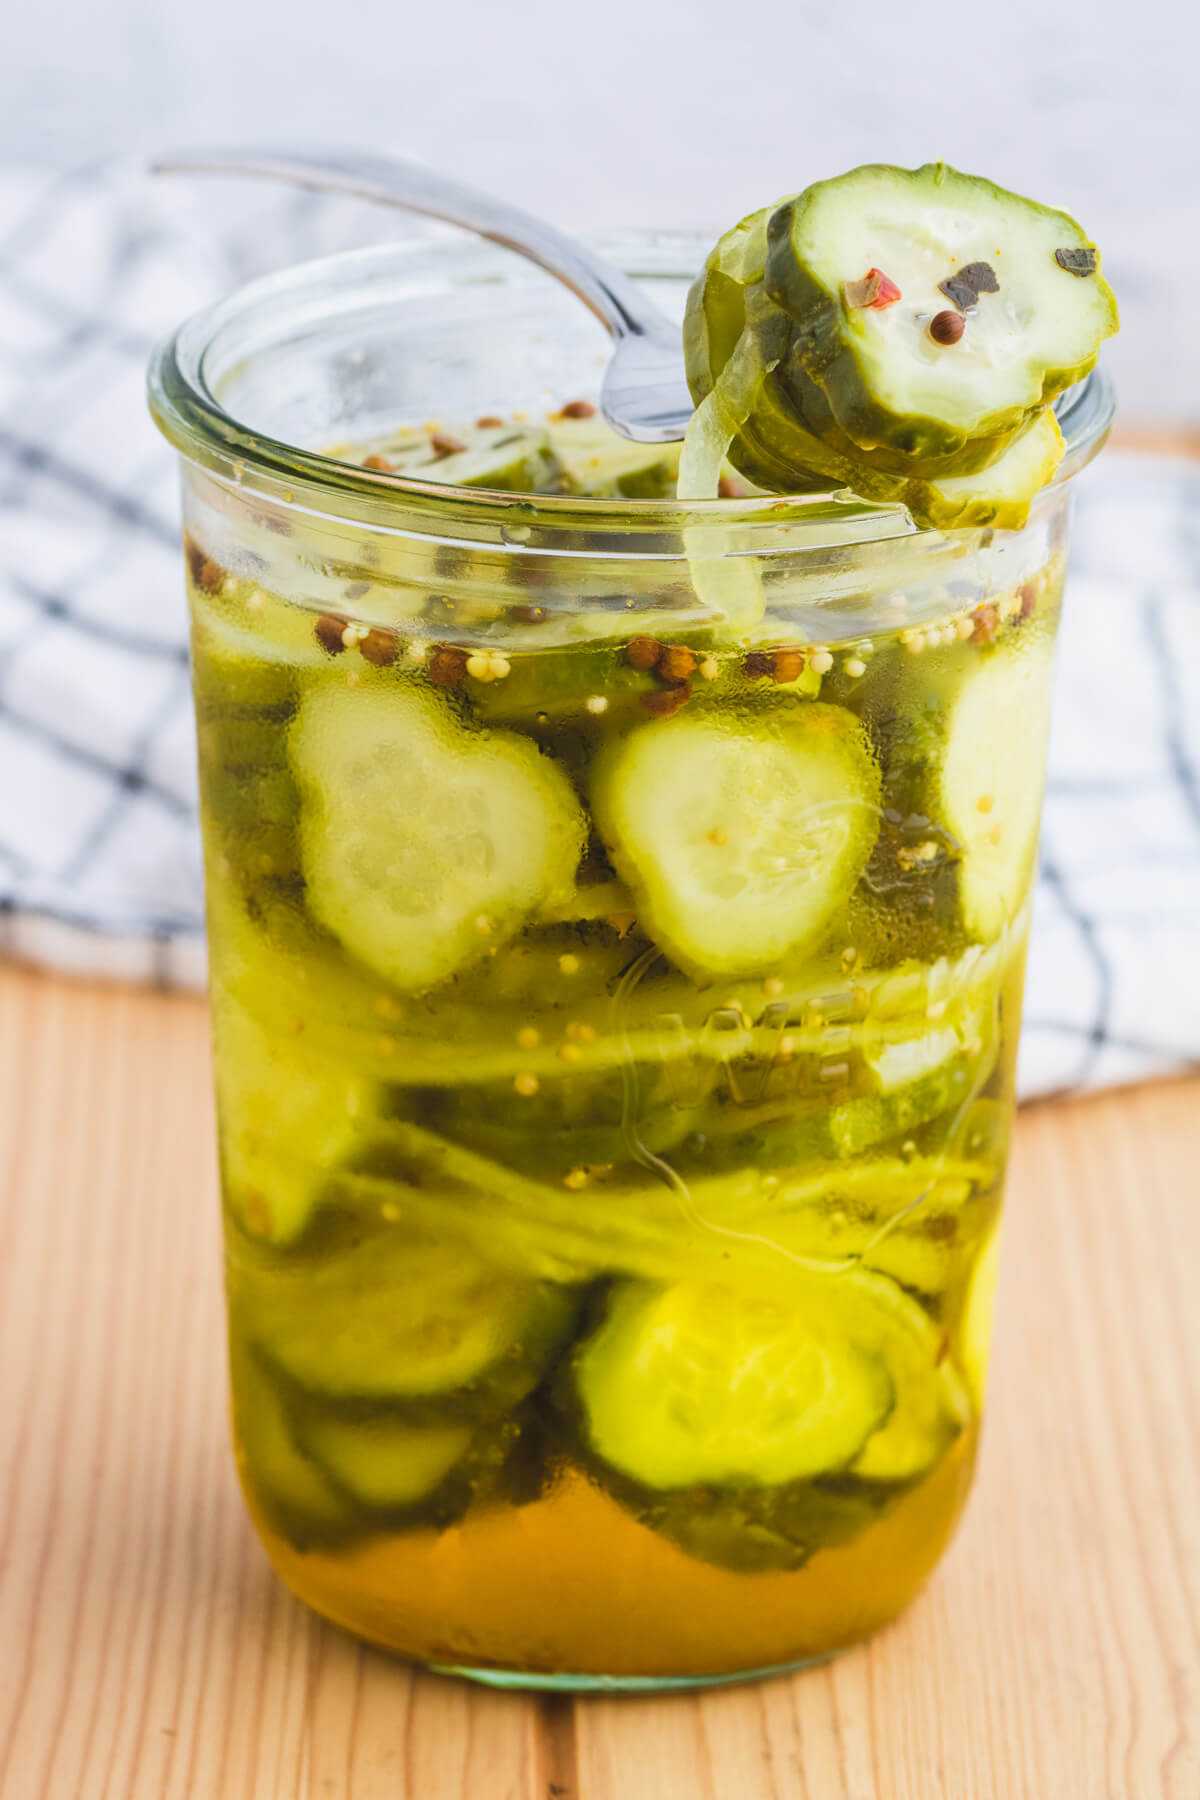 A fork holding sliced Refrigerator Bread and Butter pickles over a glass jar of pickles.